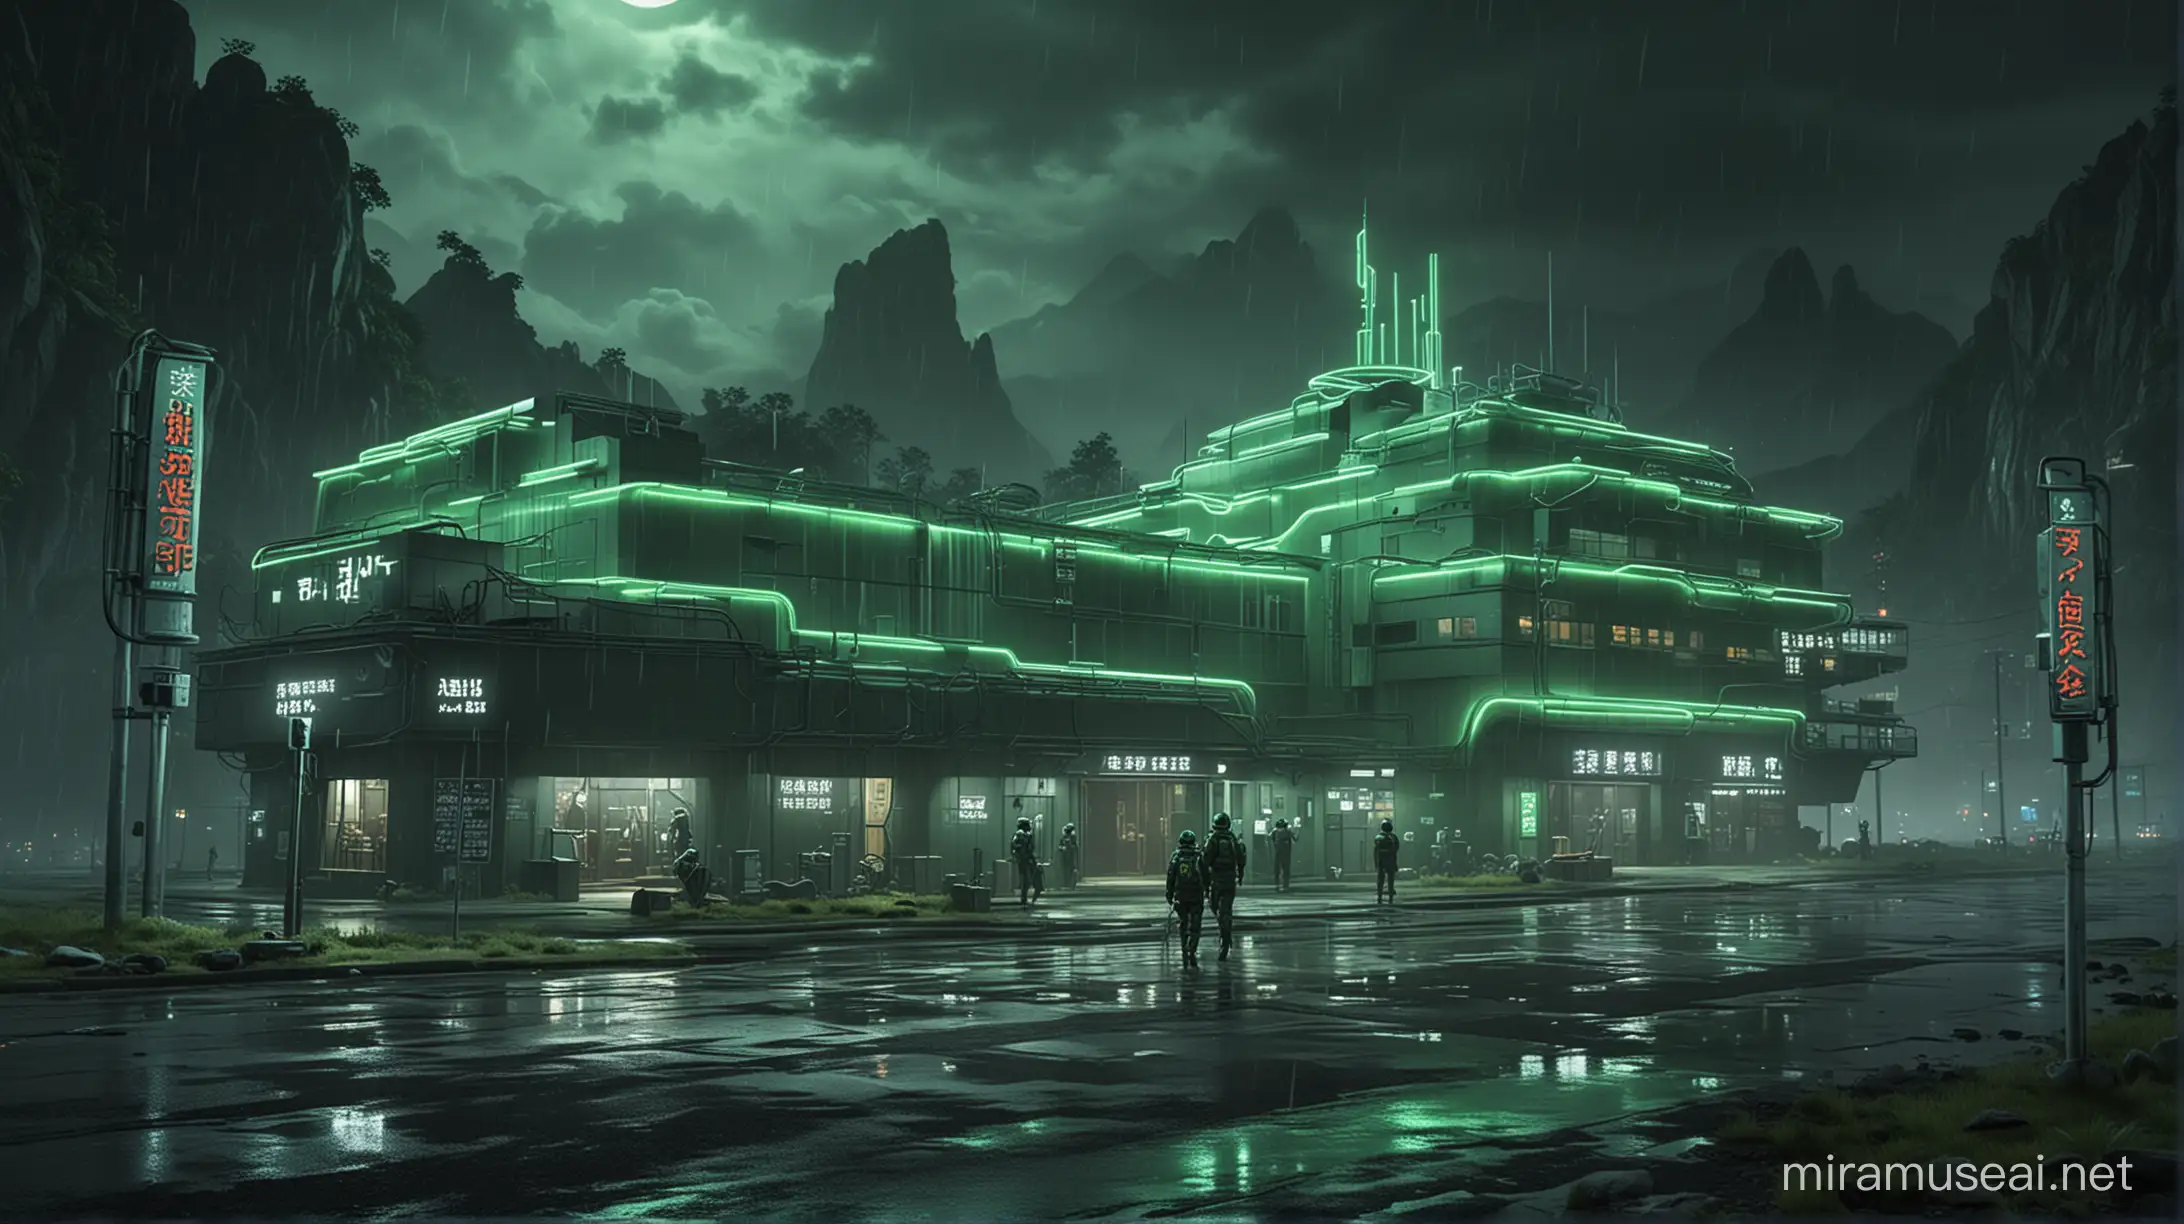 Realistic Research Center with Green Neon Lights and Atmospheric Setting